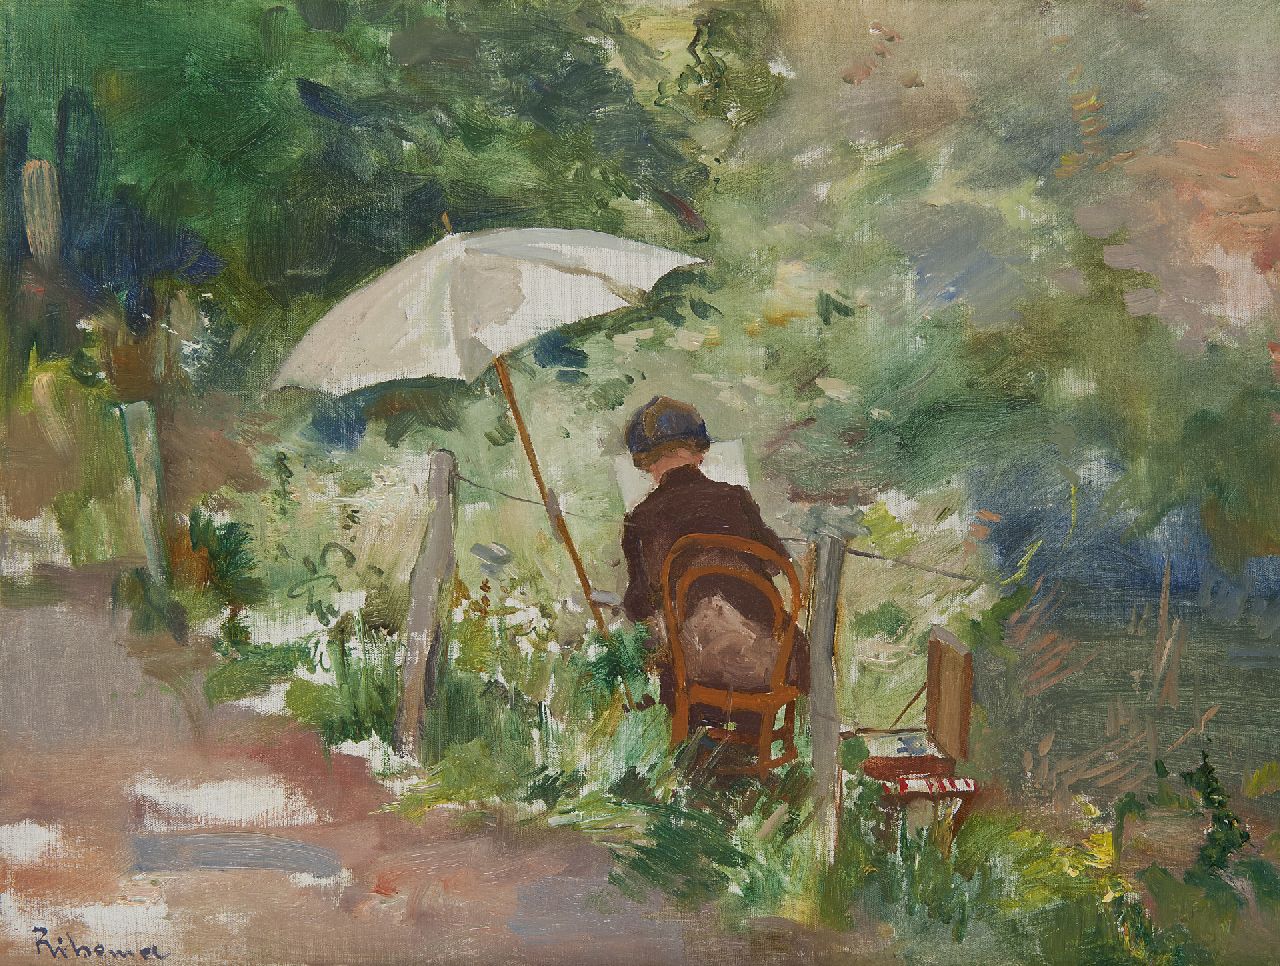 Ritsema J.C.  | 'Jacob' Coenraad Ritsema, A painter with parasol, oil on canvas 37.8 x 50.2 cm, signed l.l.